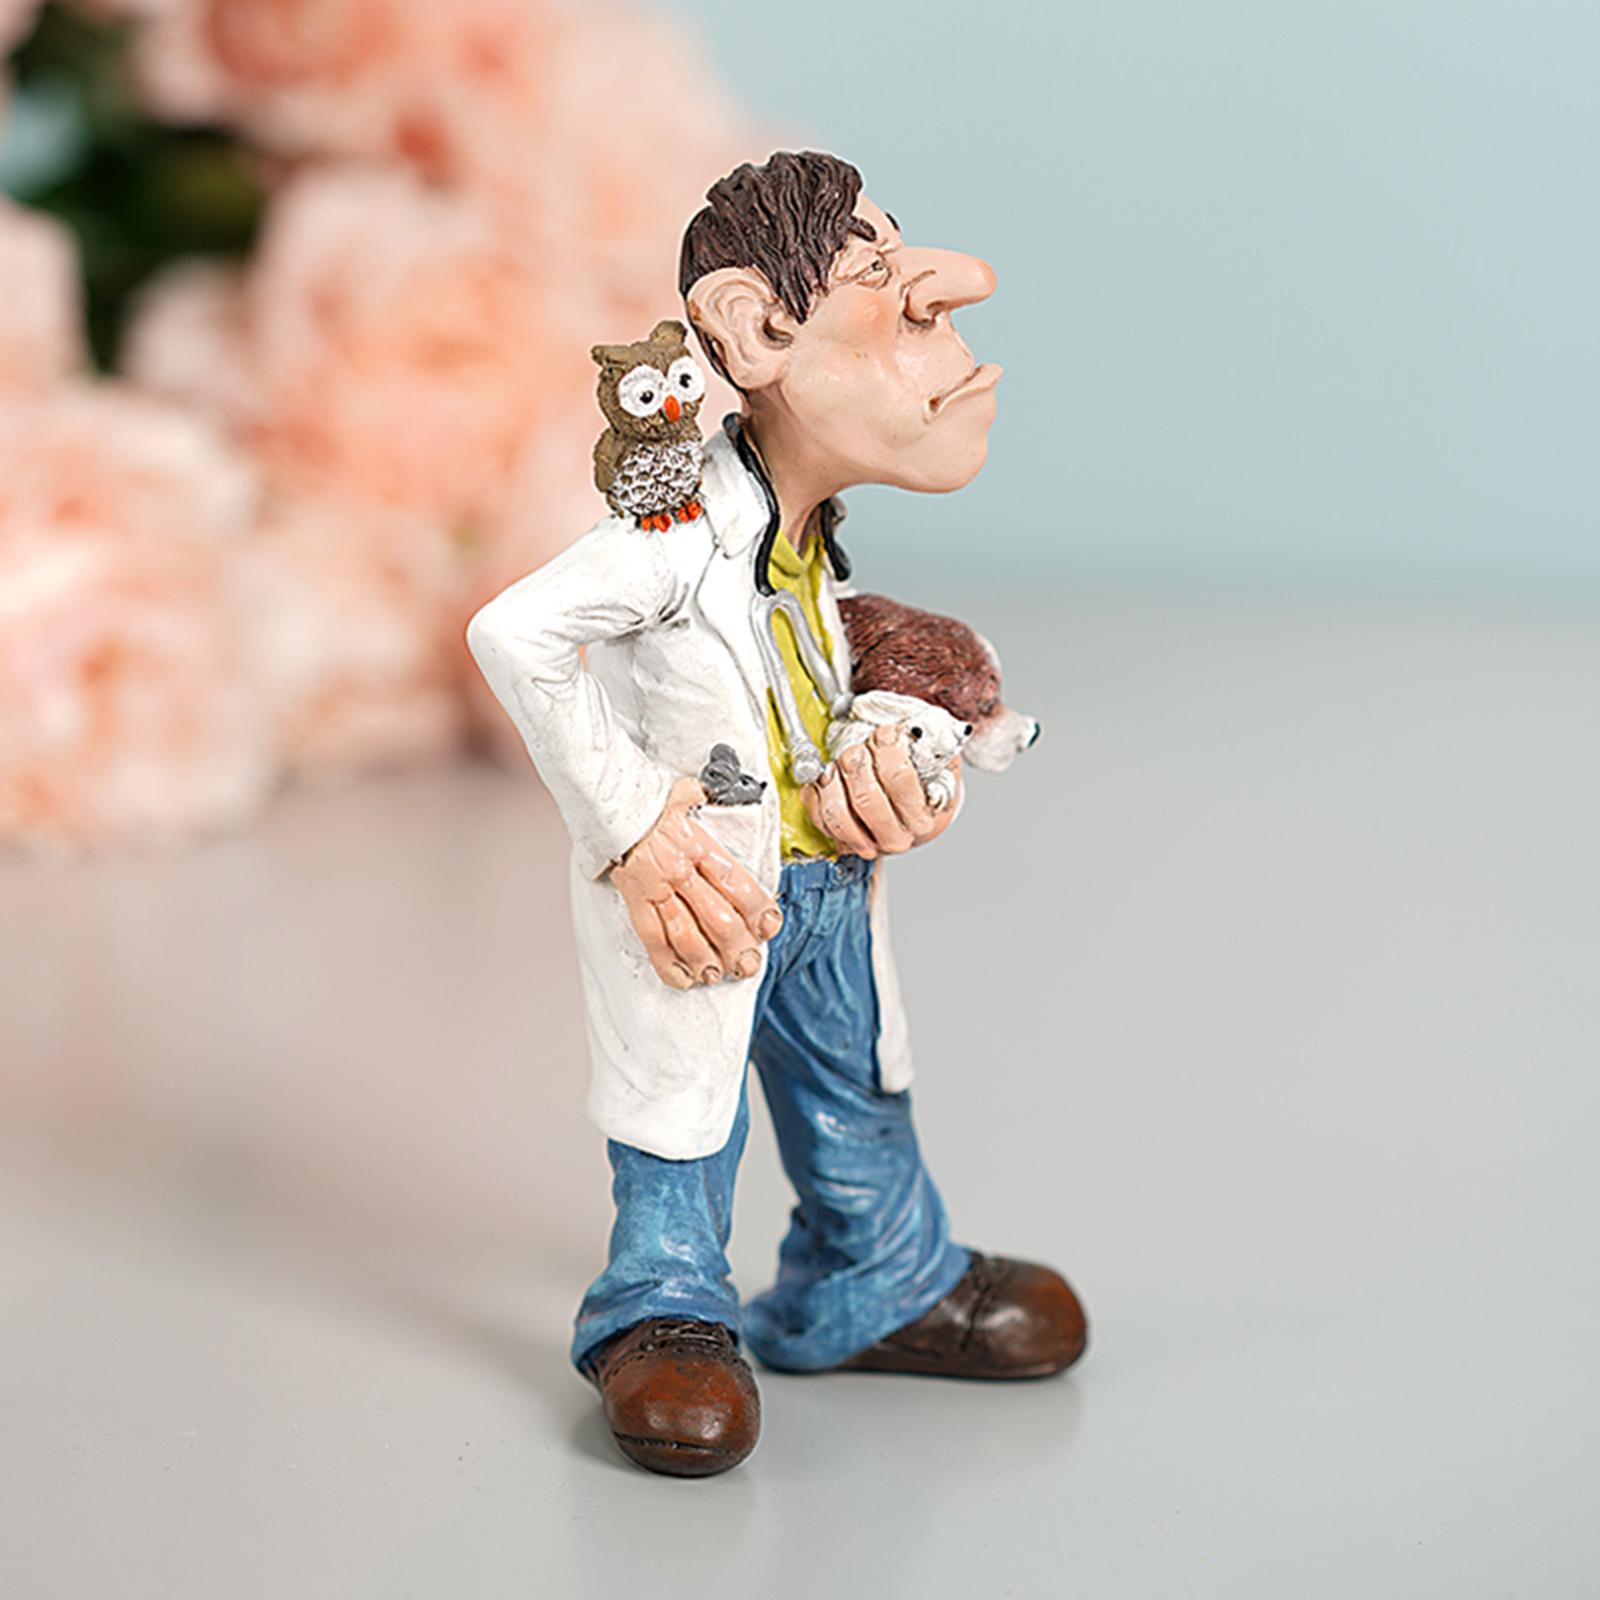 Resin Sculptures Decoration Doctor Statues Figurines for Office Bedroom Home